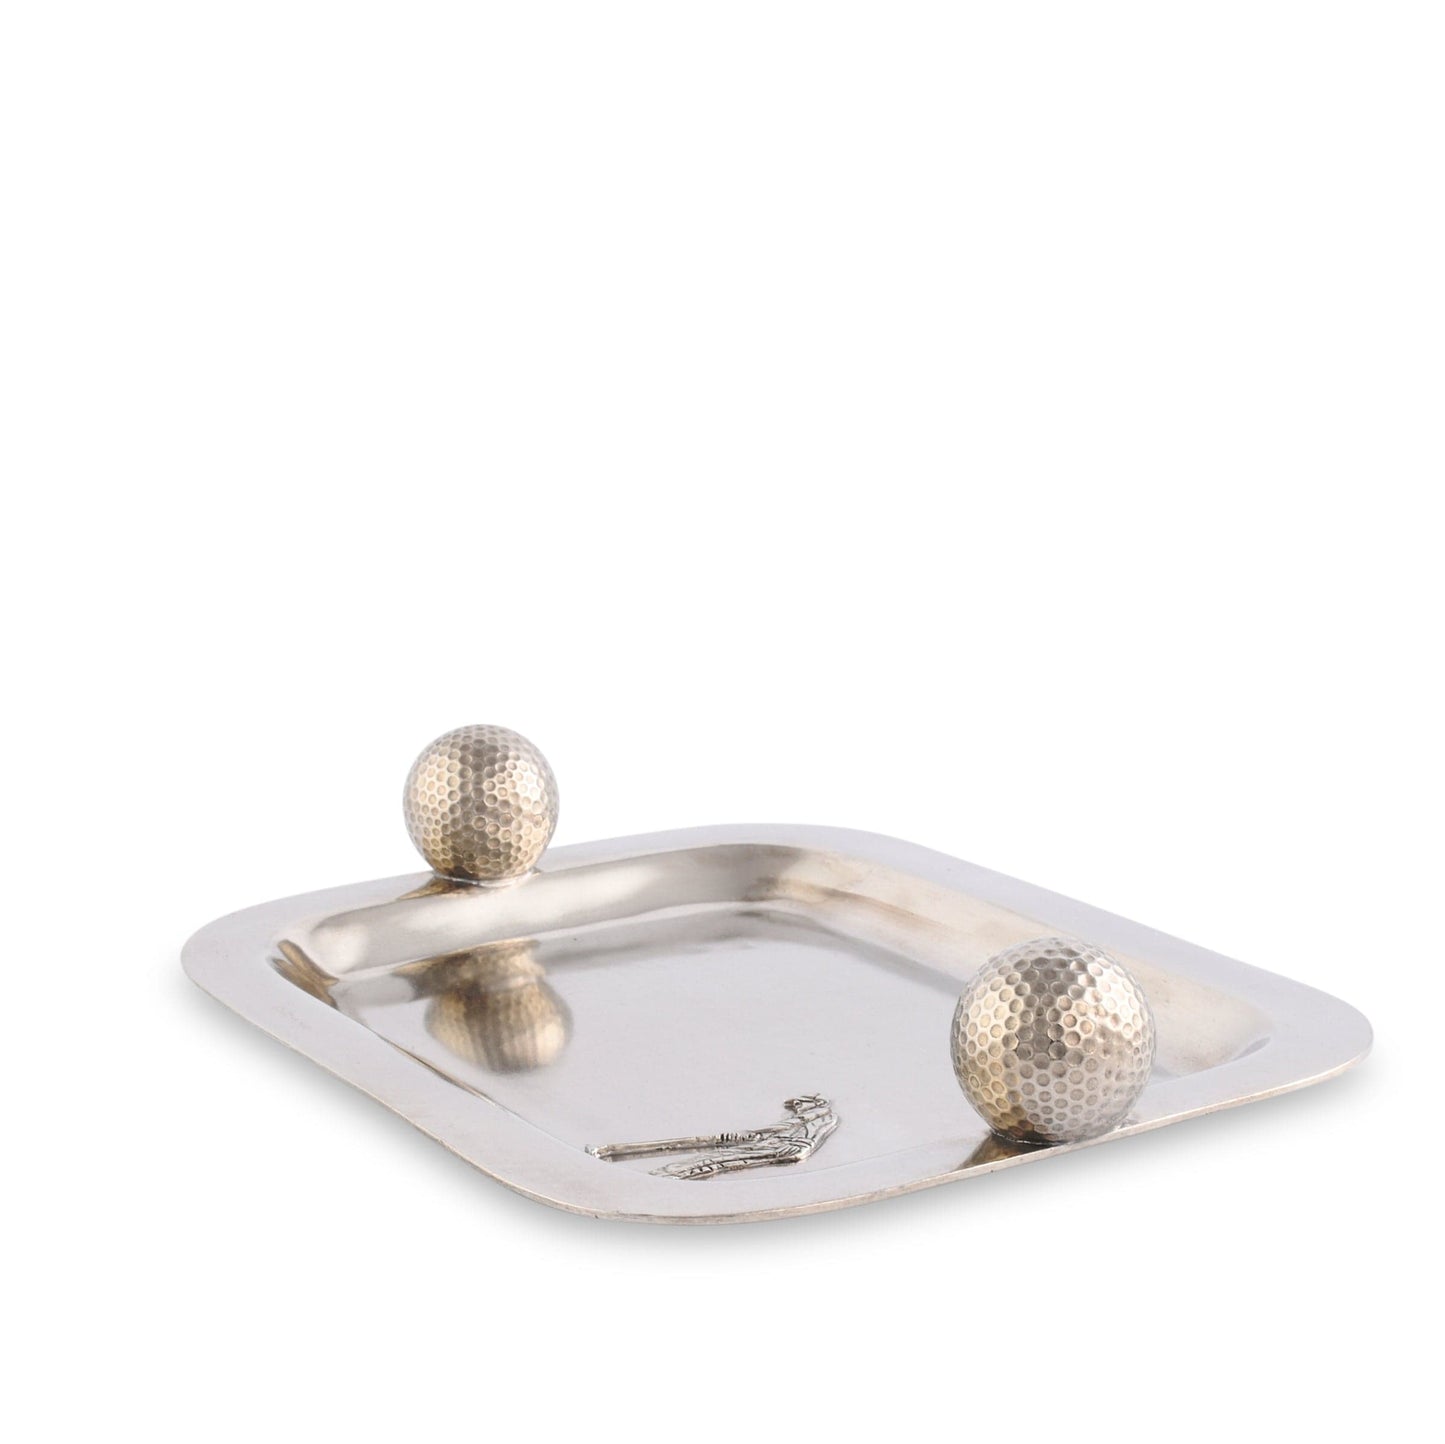 Pewter Catchall Tray with Golf Ball Handles